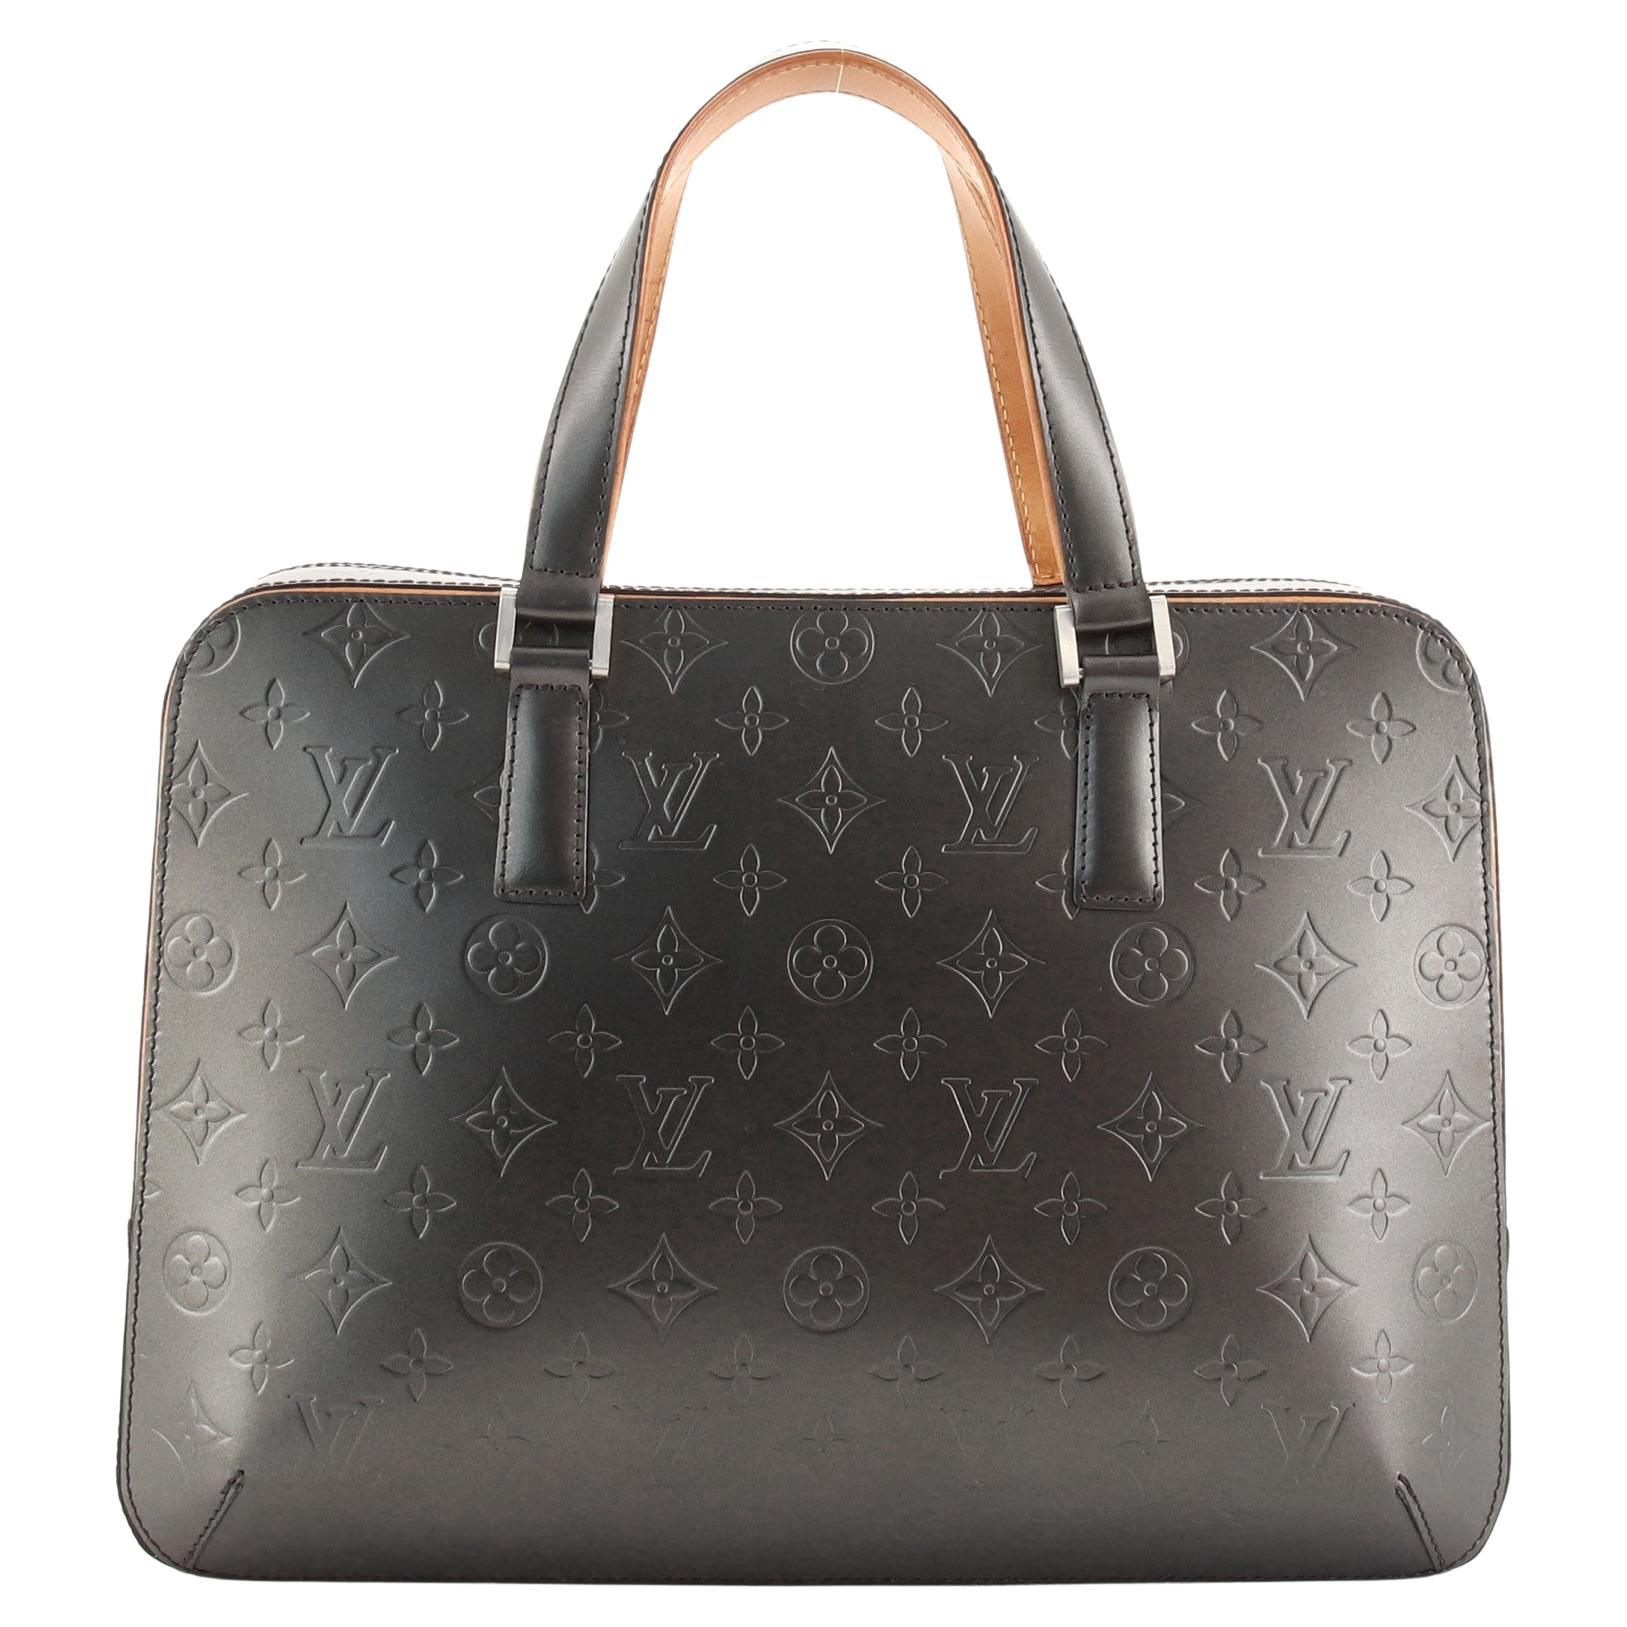 Buy Free Shipping Authentic Pre-owned Louis Vuitton Monogram Mat Black  Malden Hand Tote Bag Briefcase M55132 211000 from Japan - Buy authentic  Plus exclusive items from Japan